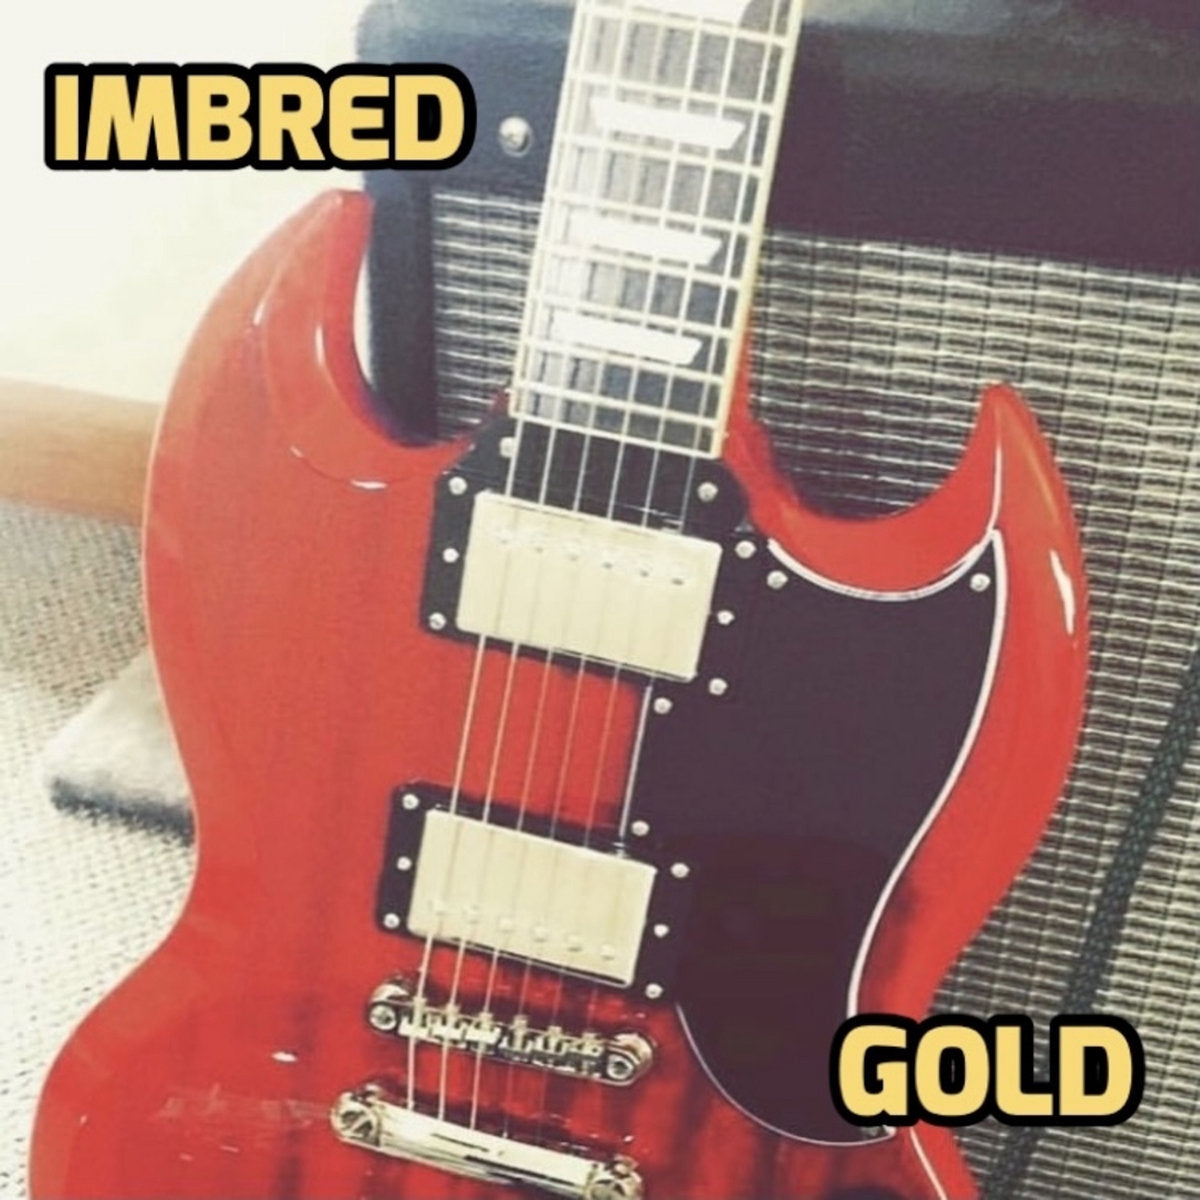 Imbred – ‘Gold’